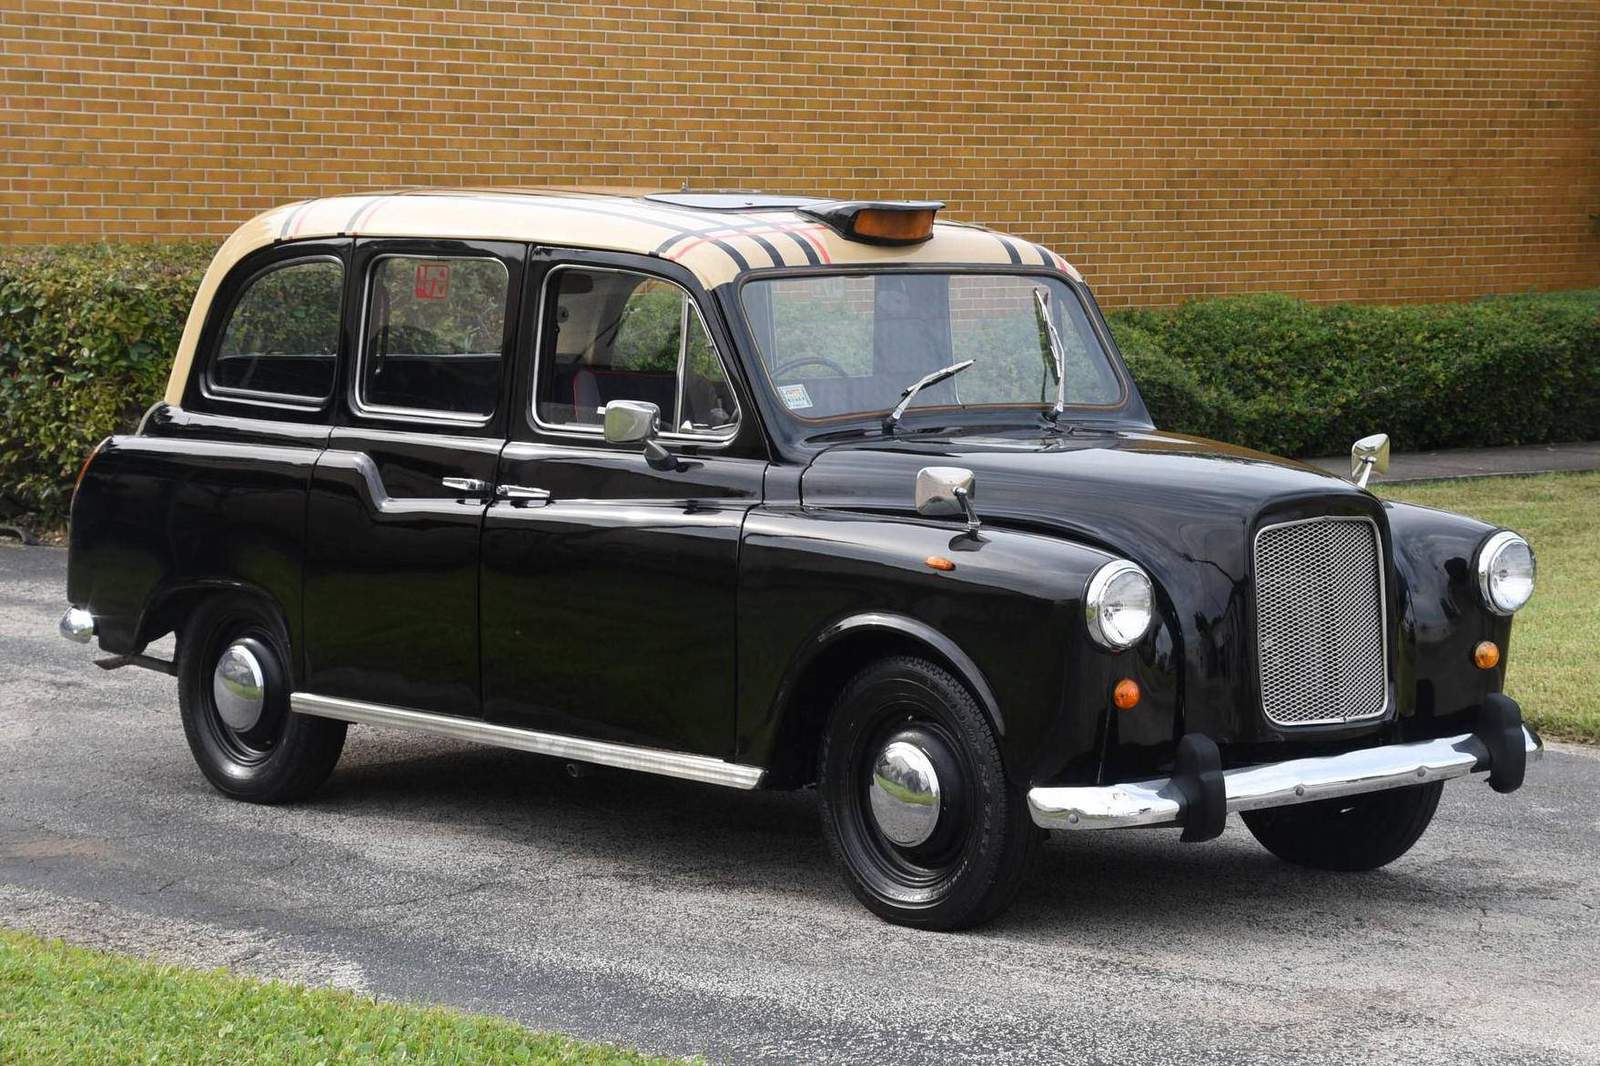 Why you want to buy this London taxi that’s in Jacksonville